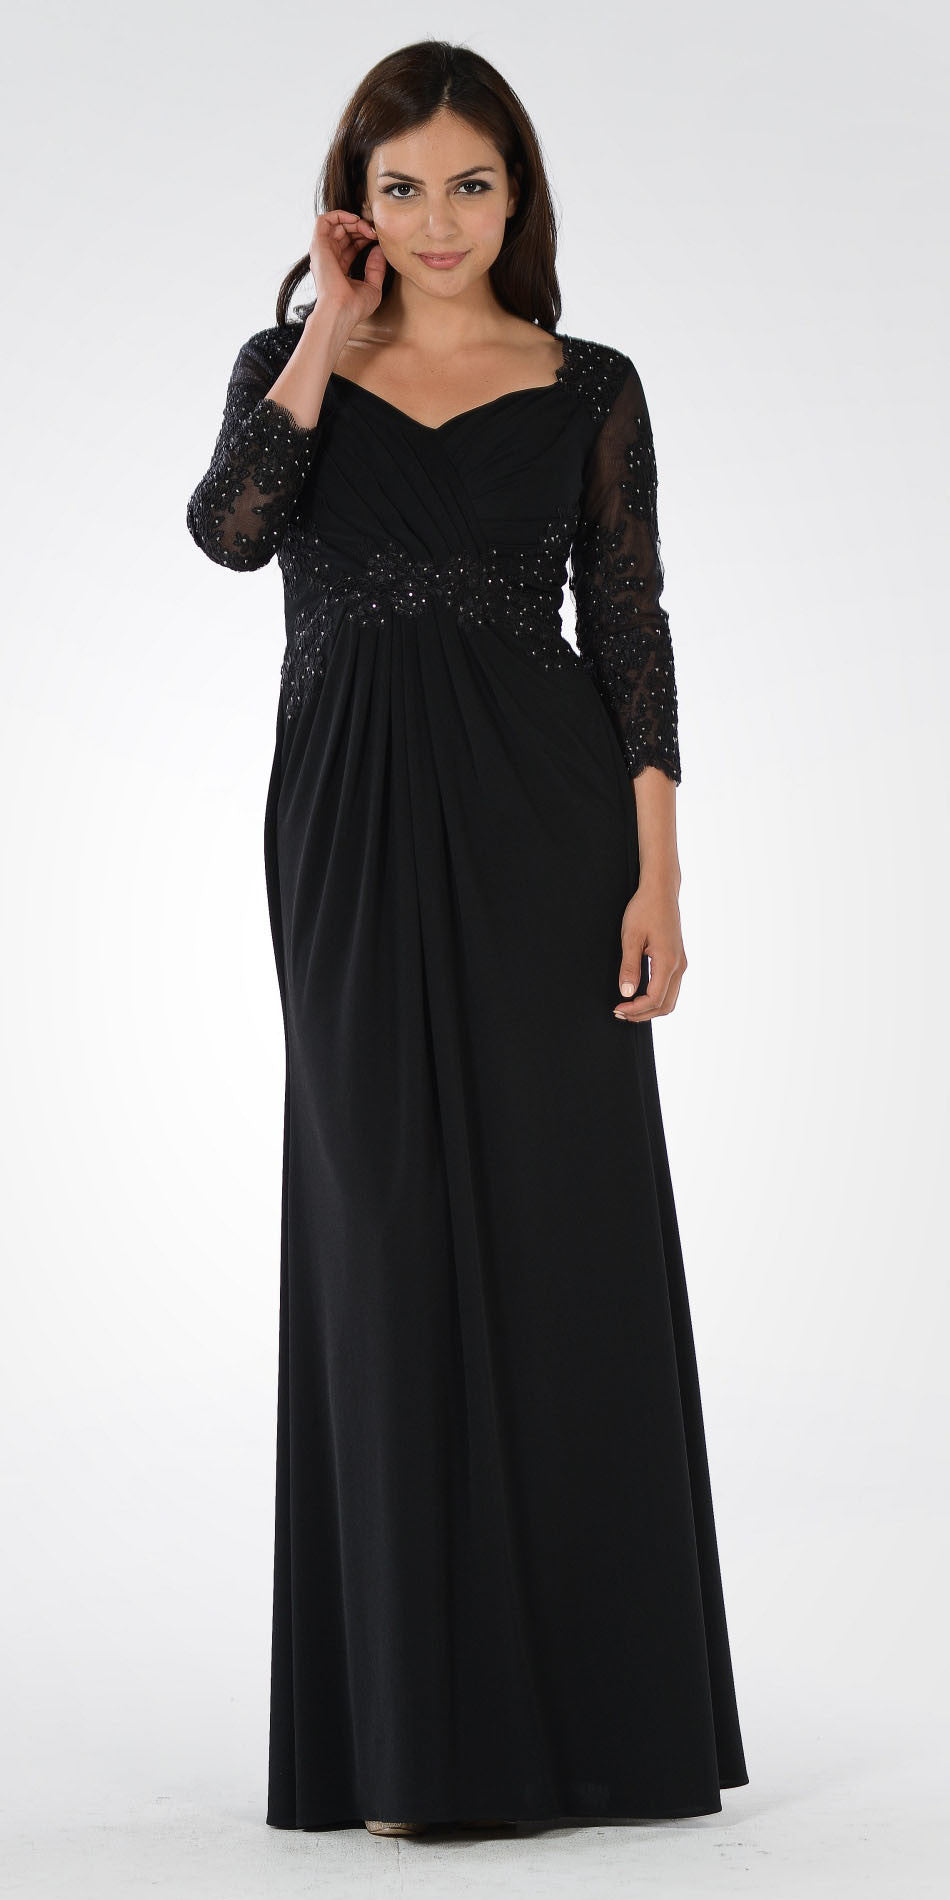 Black Pleated Bodice Appliqued Waist and Sleeves Formal Dress Long